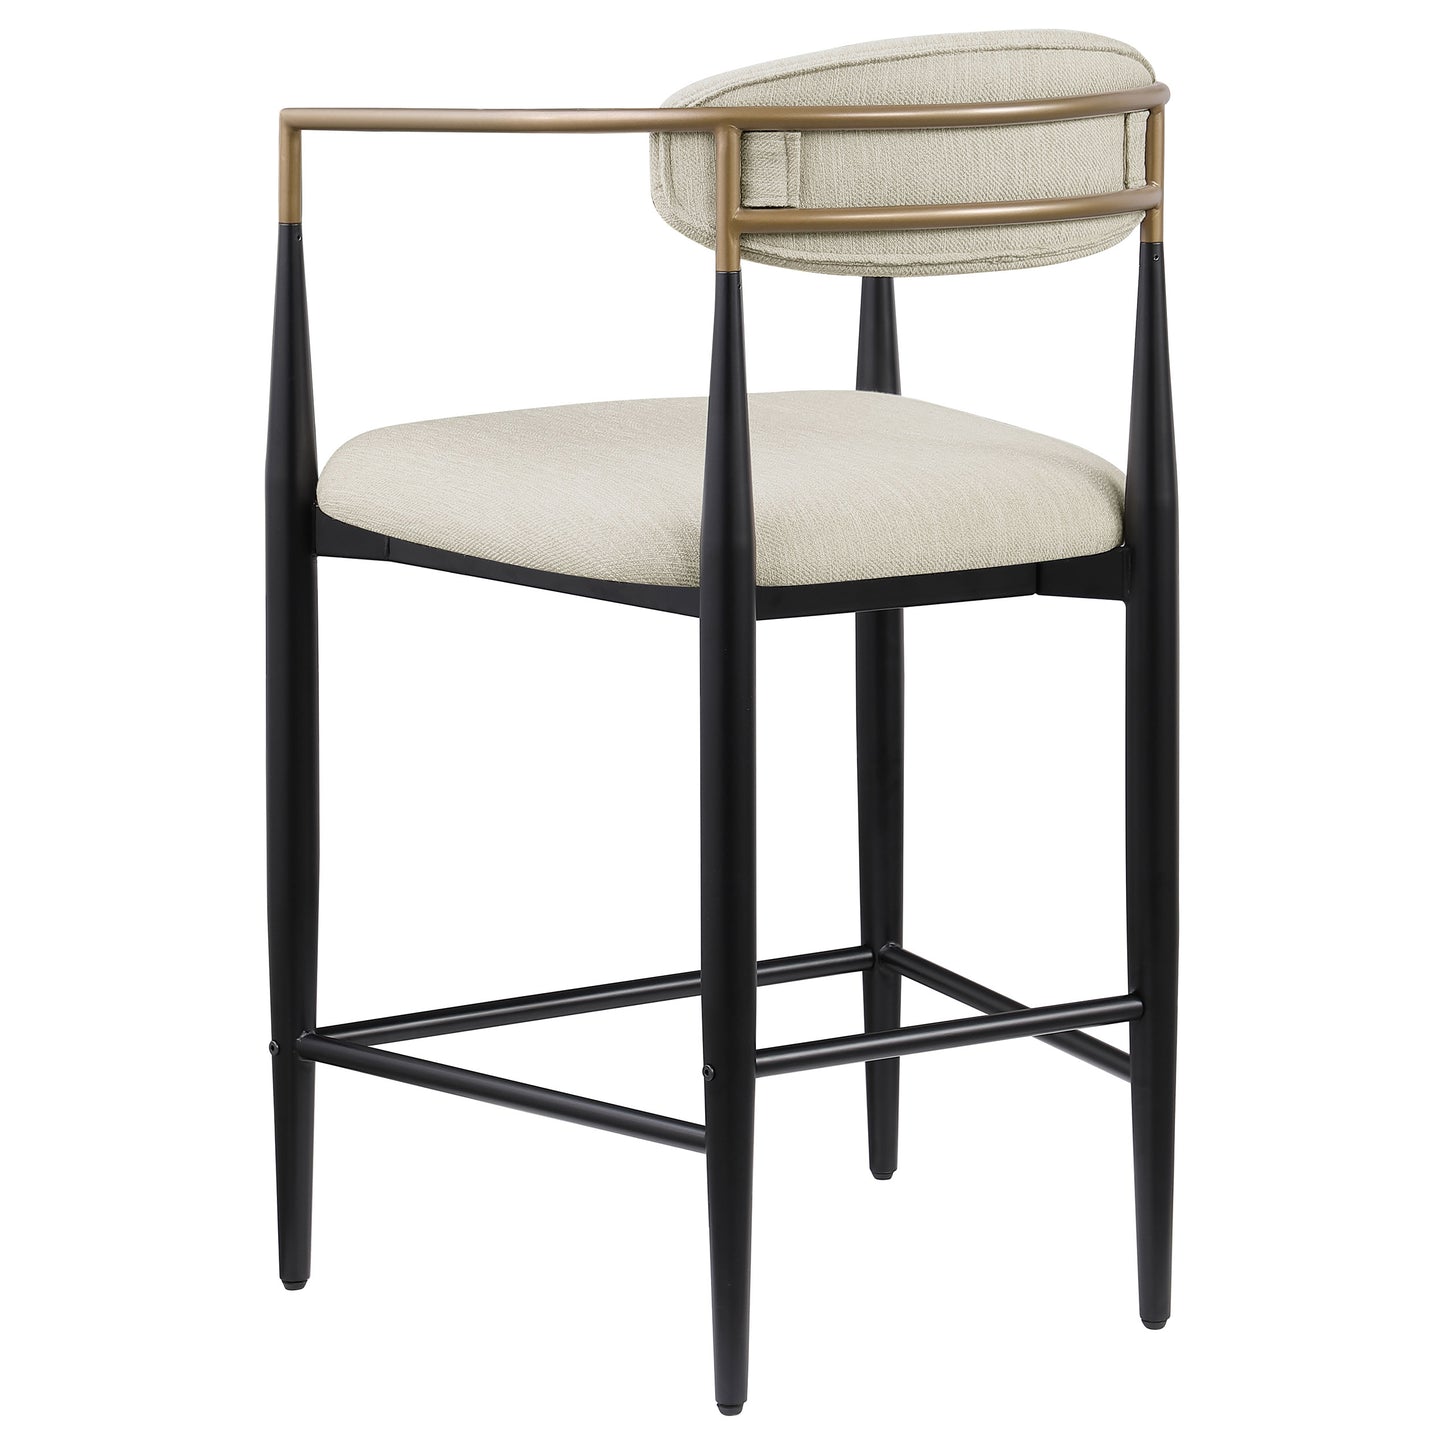 Tina Metal Counter Height Bar Stool with Upholstered Back and Seat Beige (Set of 2)